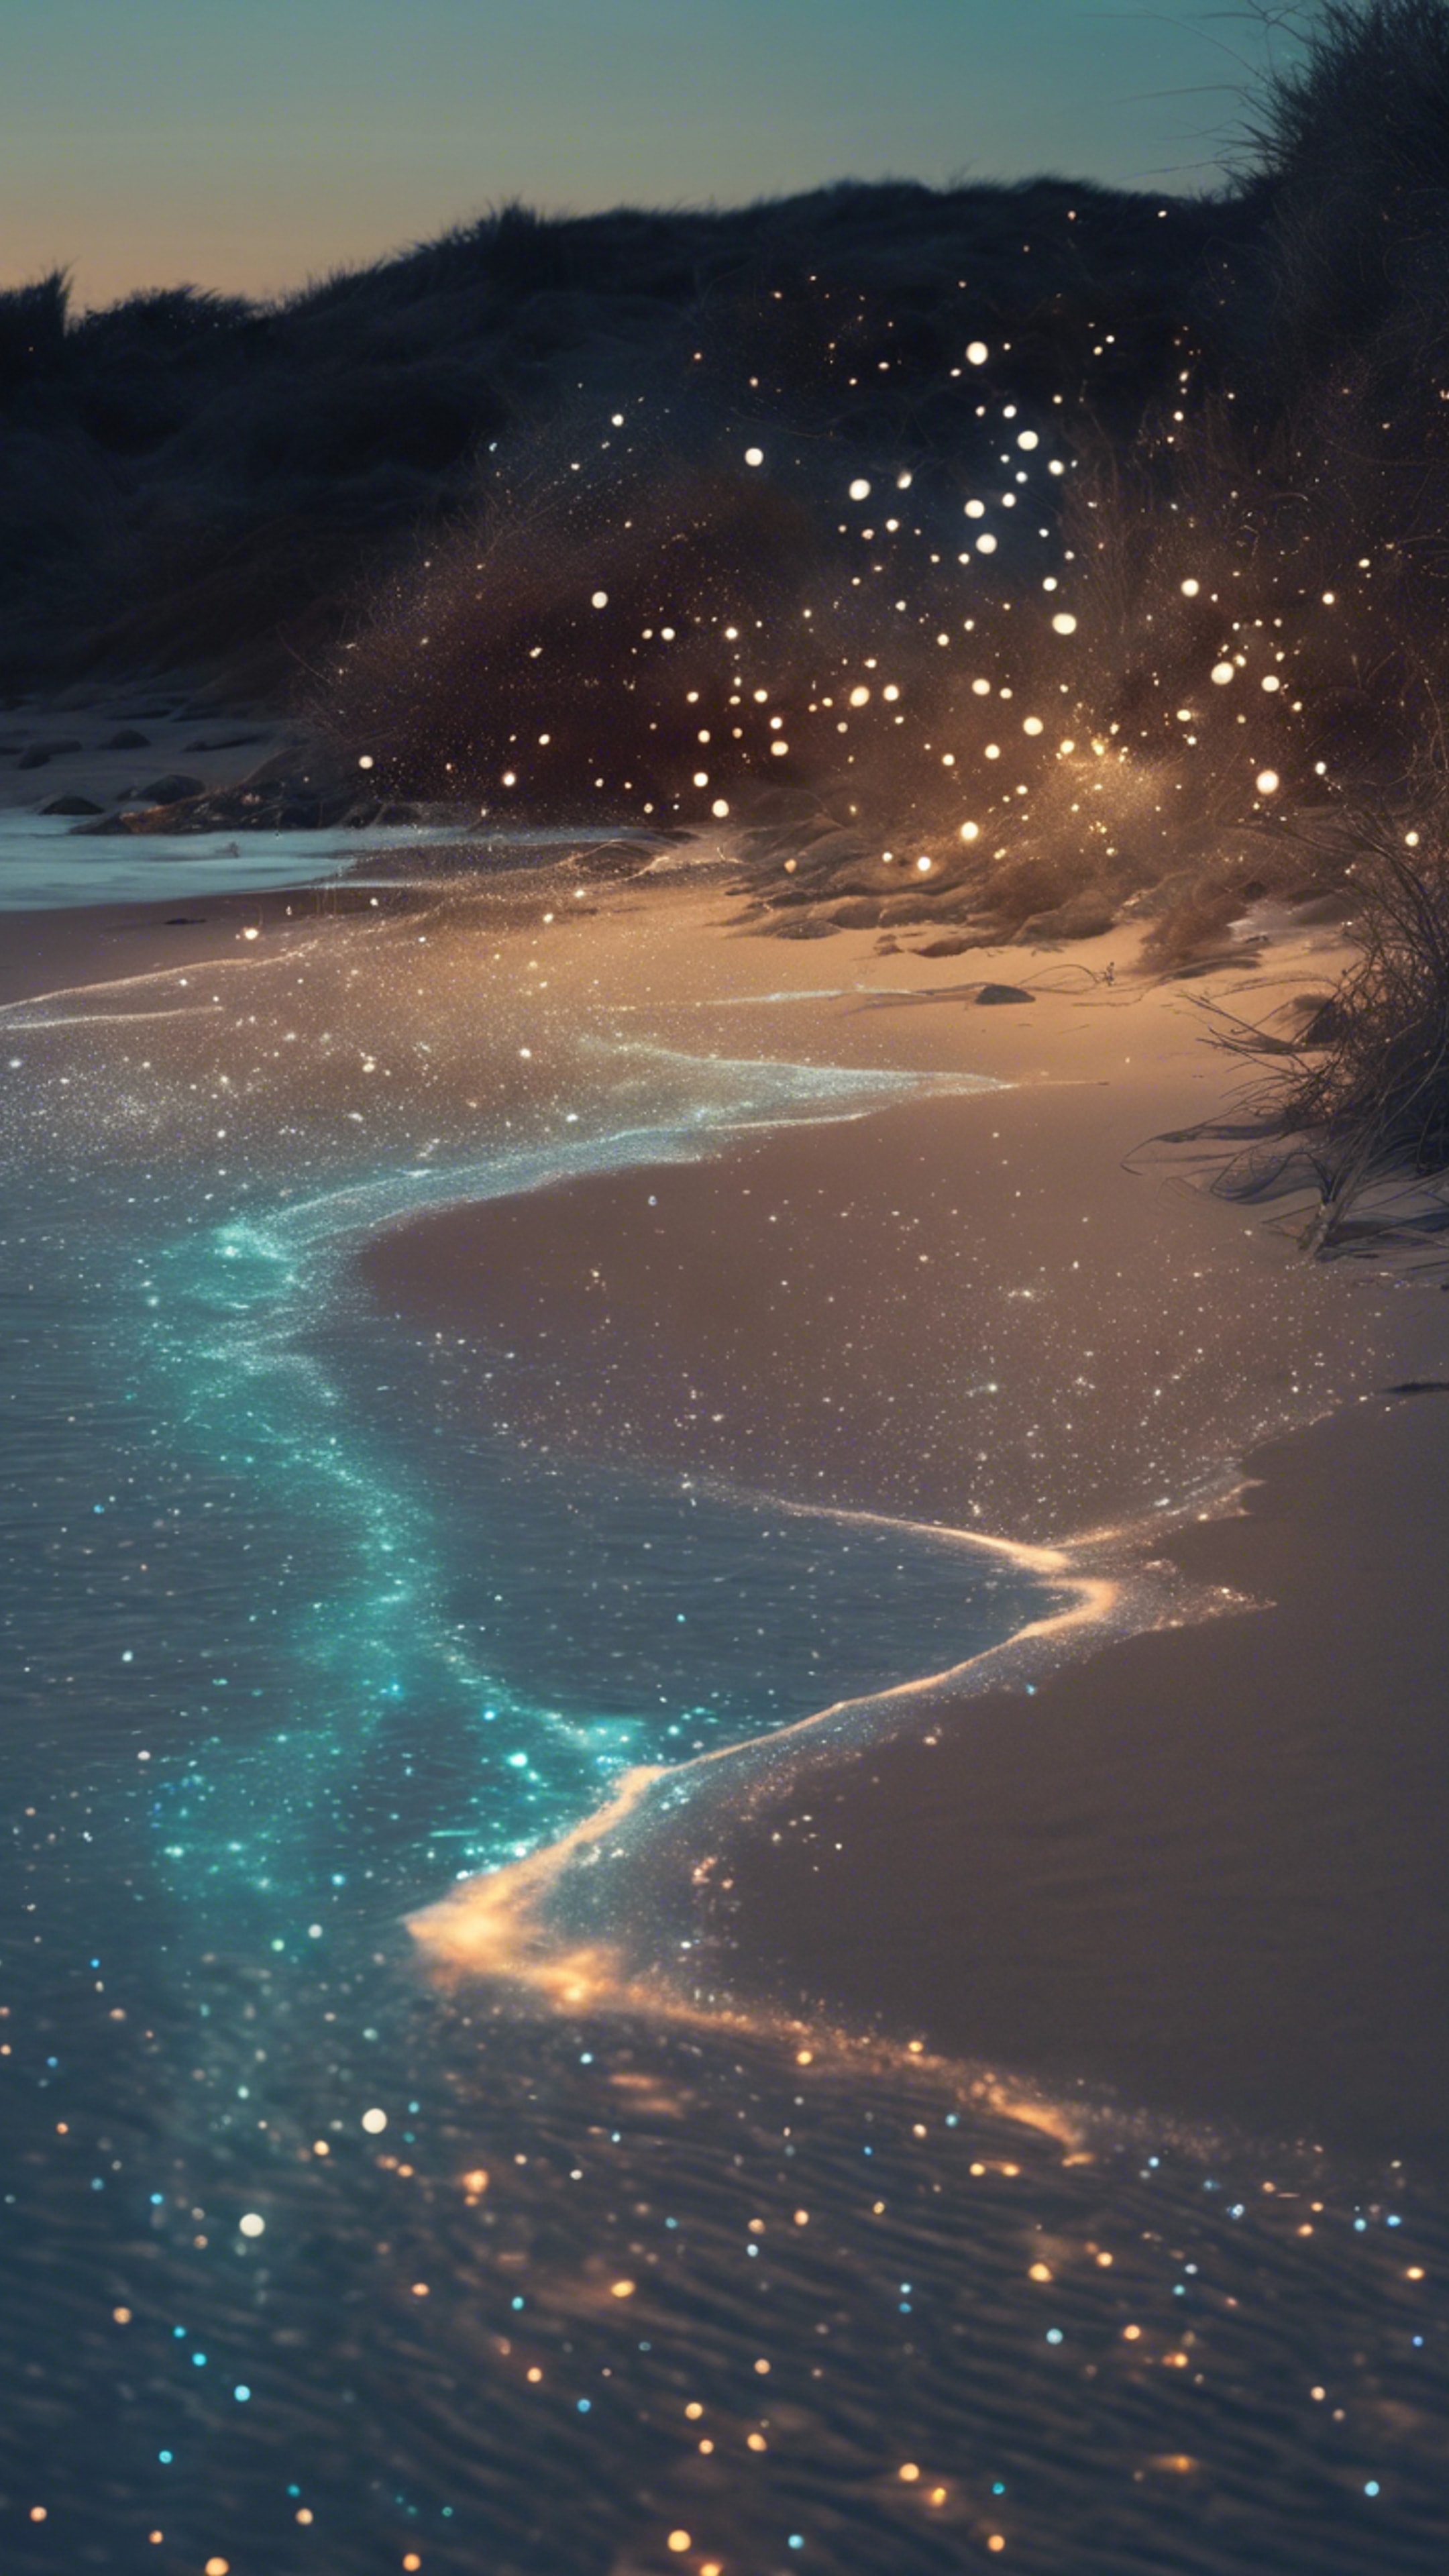 A starry night at the beach with glowing bioluminescent plankton washing up on the shore.壁紙[d401d0f727fe411fb1be]